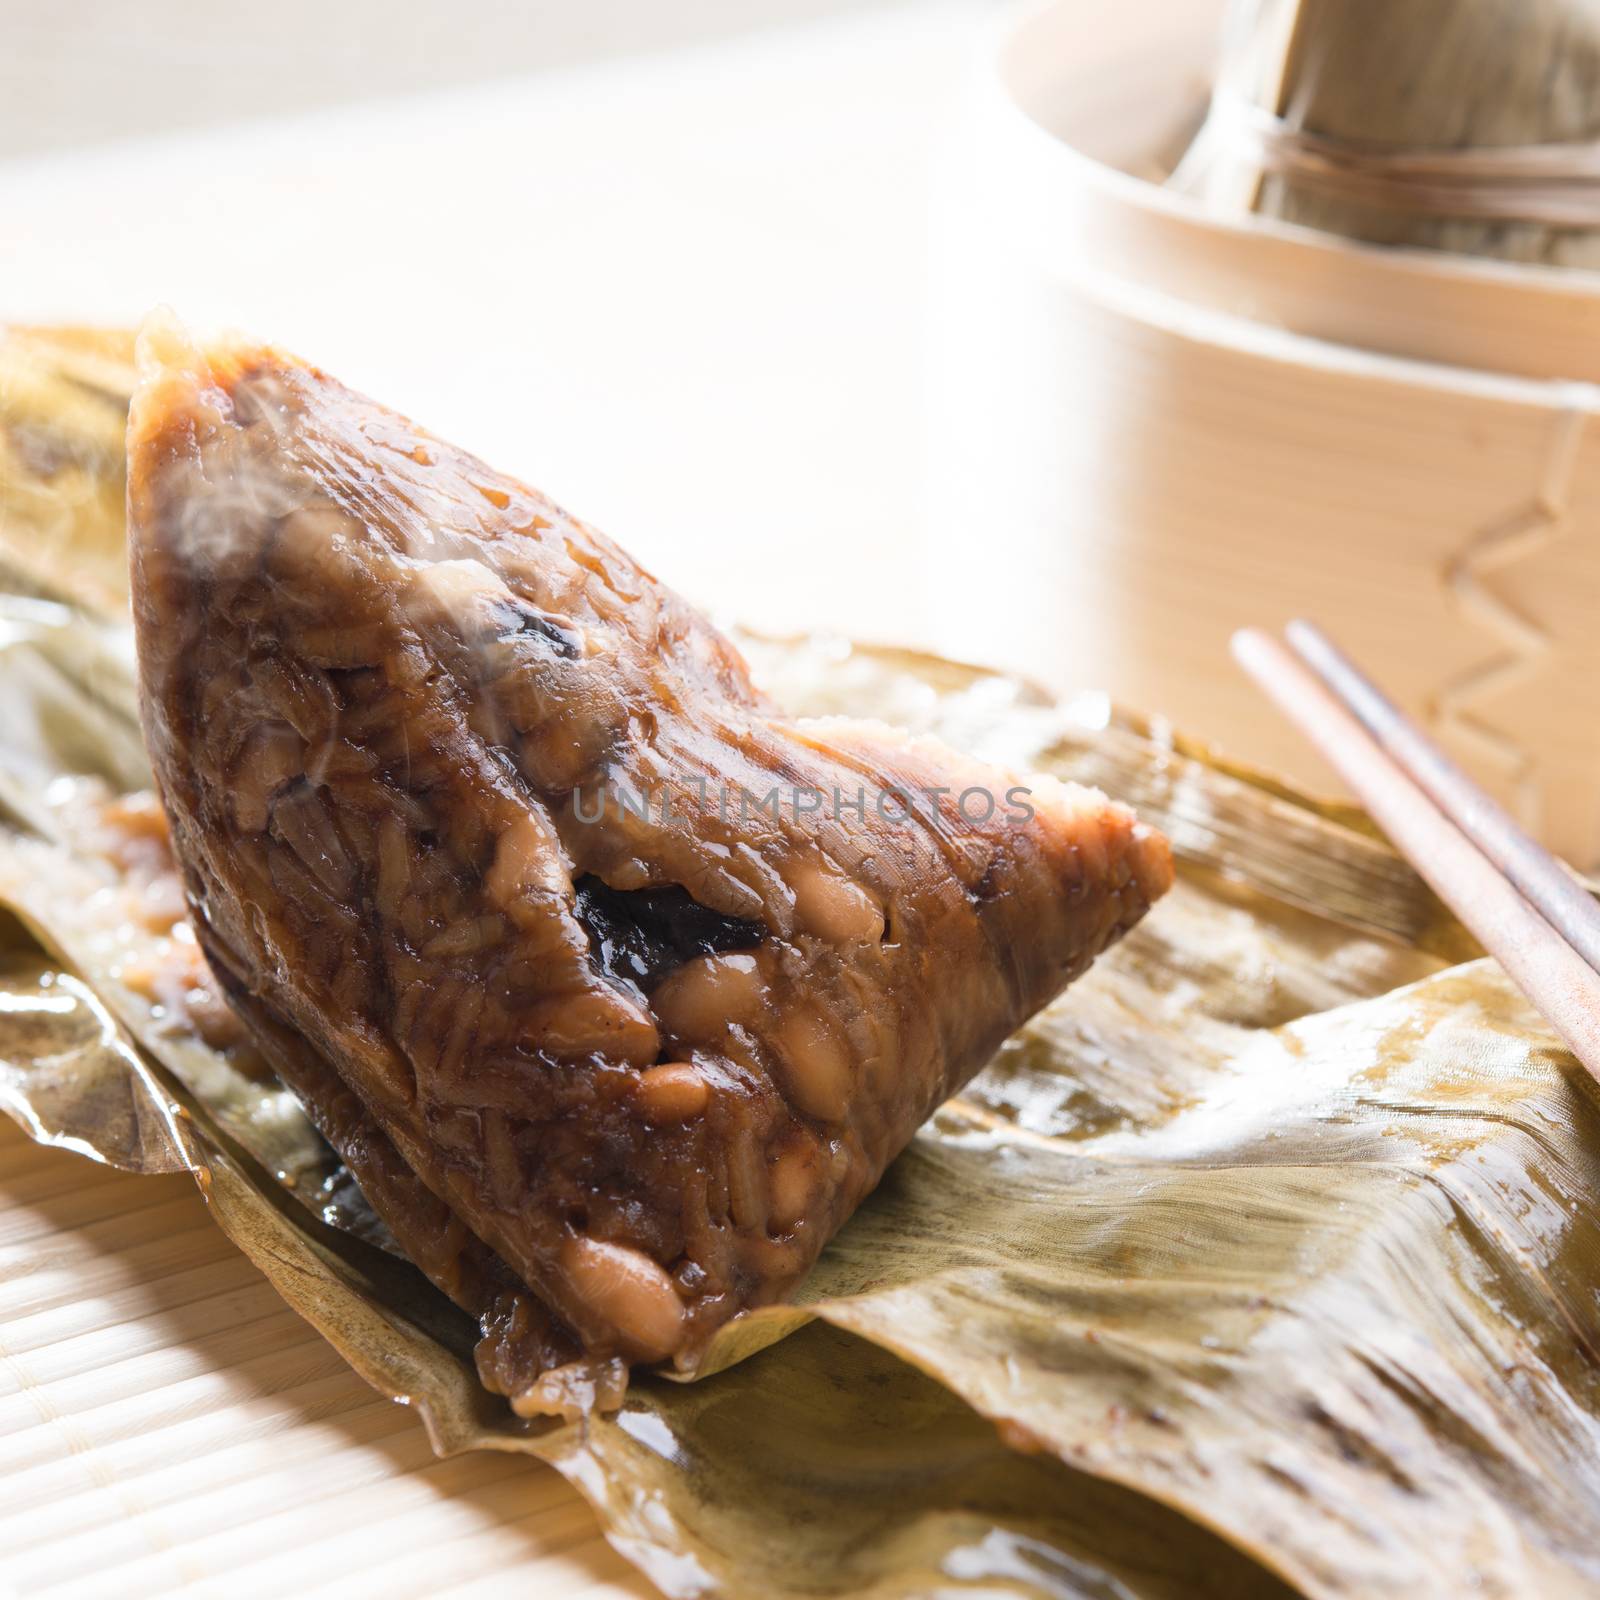 Unwrapped rice dumpling or zongzi. Traditional steamed sticky glutinous rice dumplings. Chinese food dim sum. Asian cuisine.